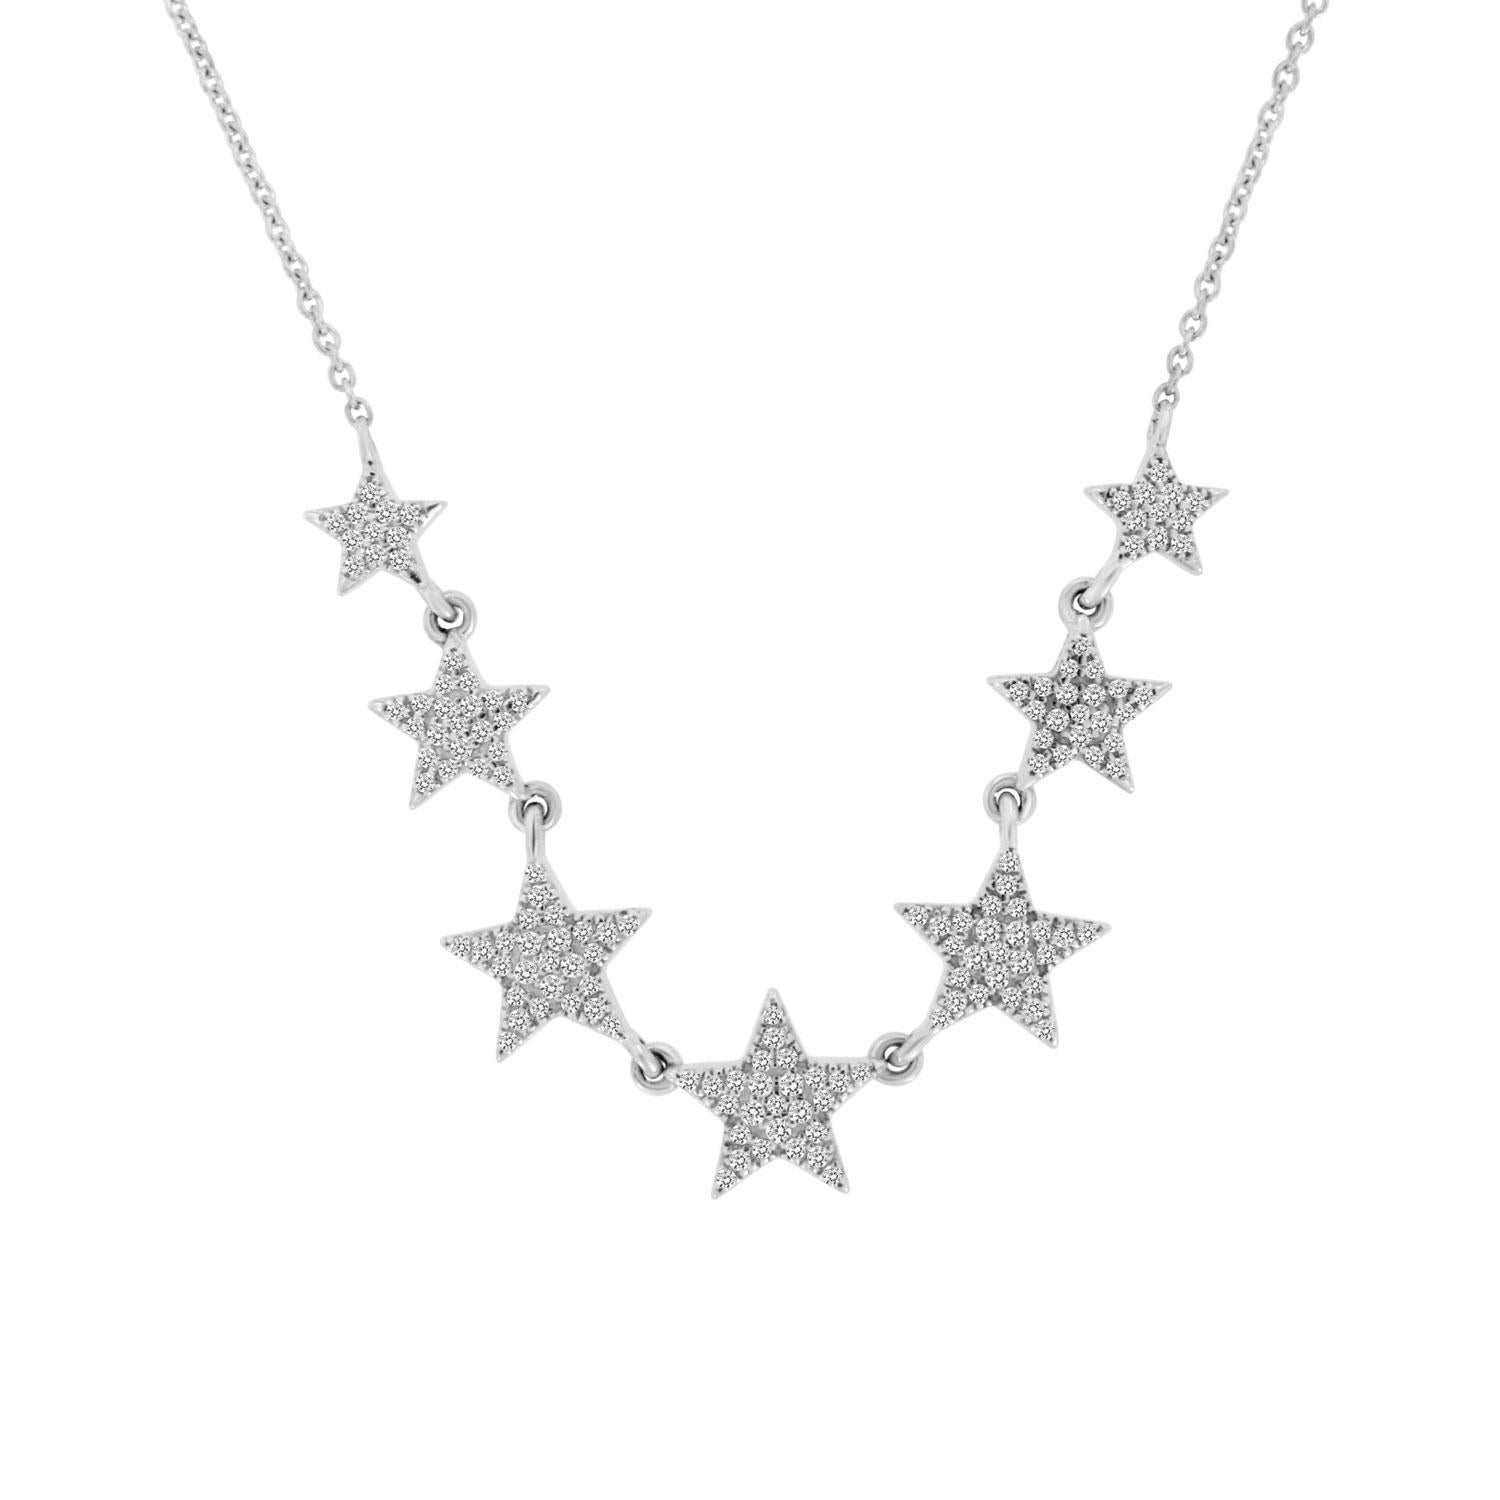 This elegant necklace features 7 diamond stars Micro Prong-set linked to each other via delicate loops. Experience The Difference in Person!

Product details: 

Center Gemstone Type: NATURAL DIAMOND
Center Gemstone Shape: ROUND
Metal: 14K White